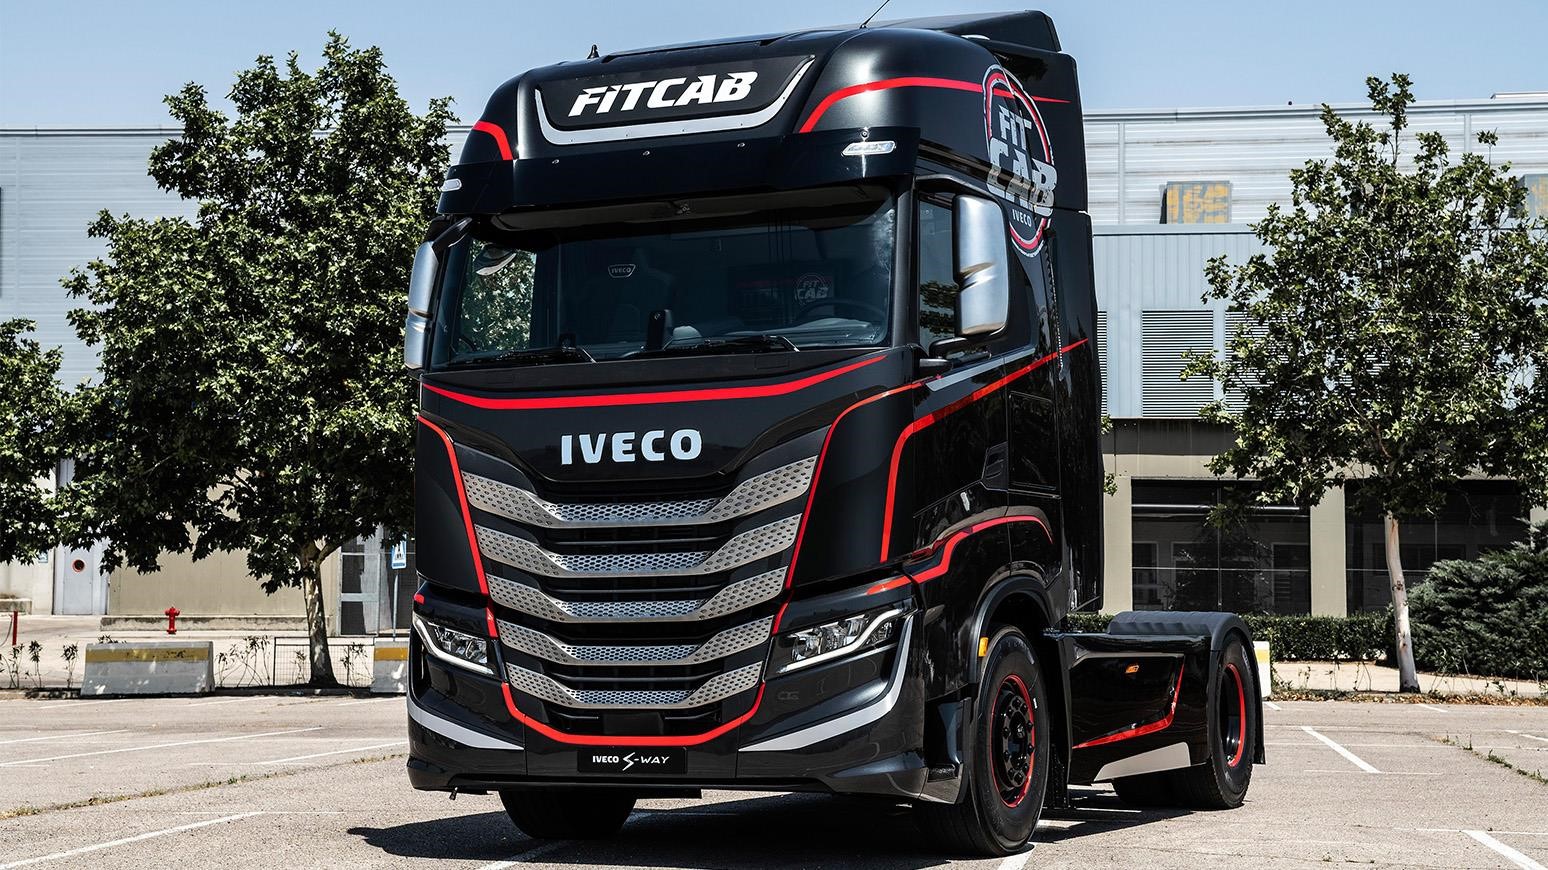 IVECO Unveils New FIT CAB & MAGIRUS Truck Concepts At The Launch Event For Its New Range Of IVECO WAY Heavy Trucks